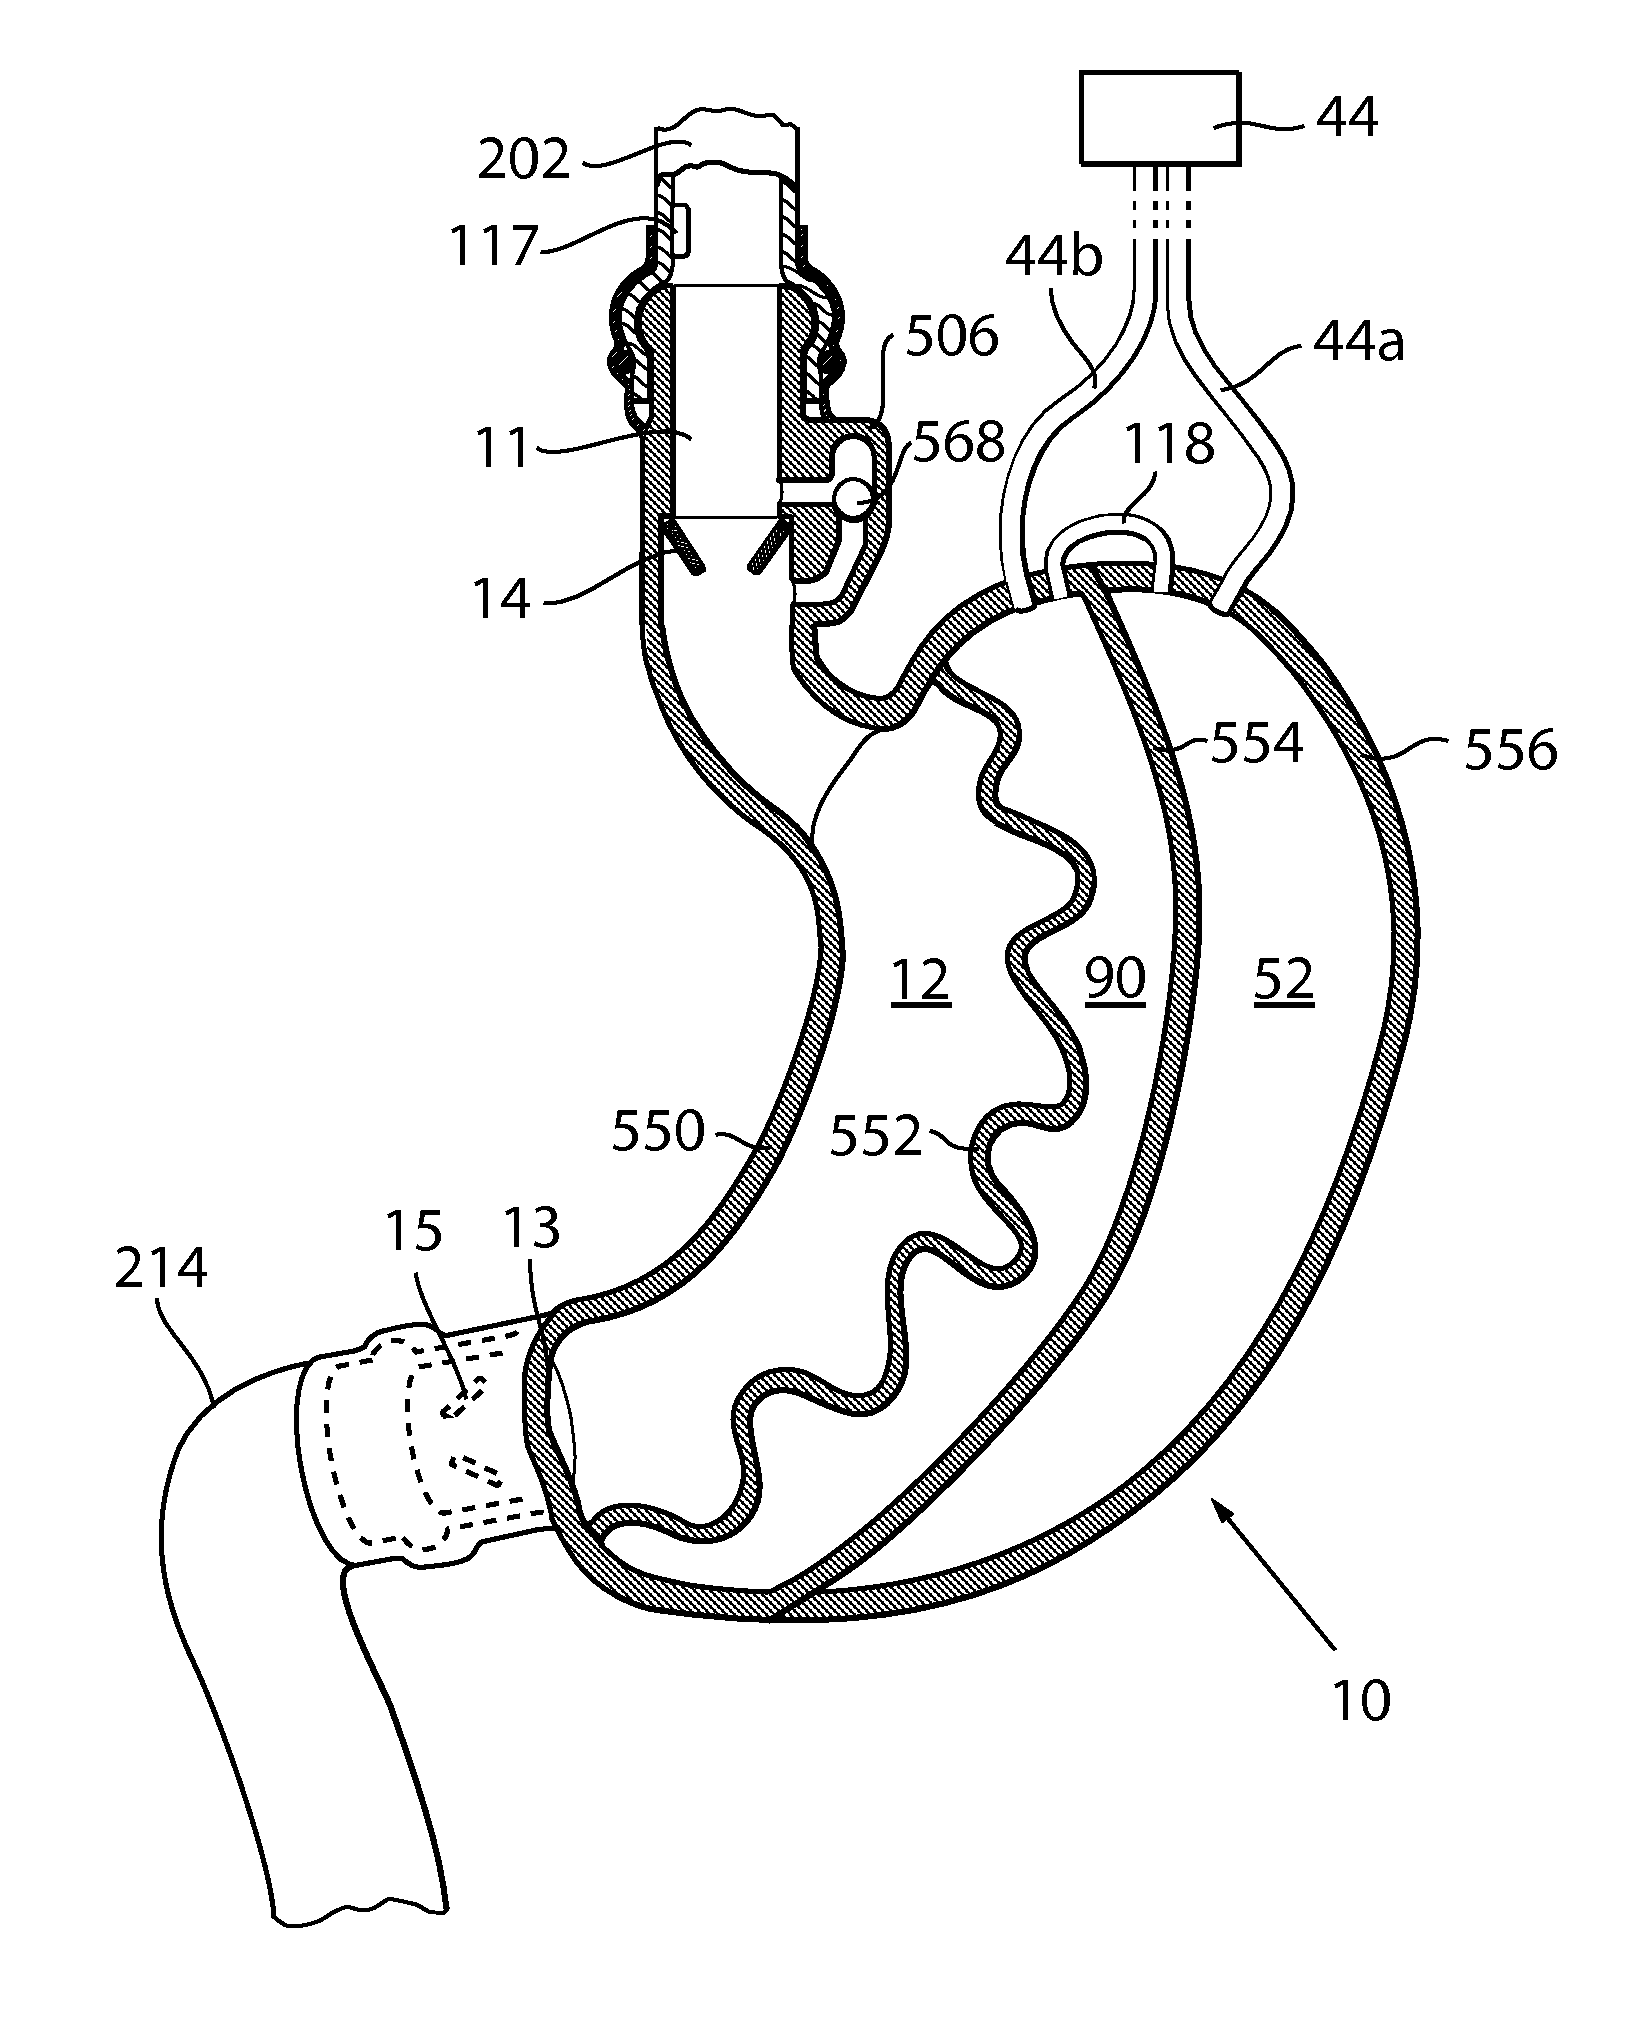 Artificial stomach